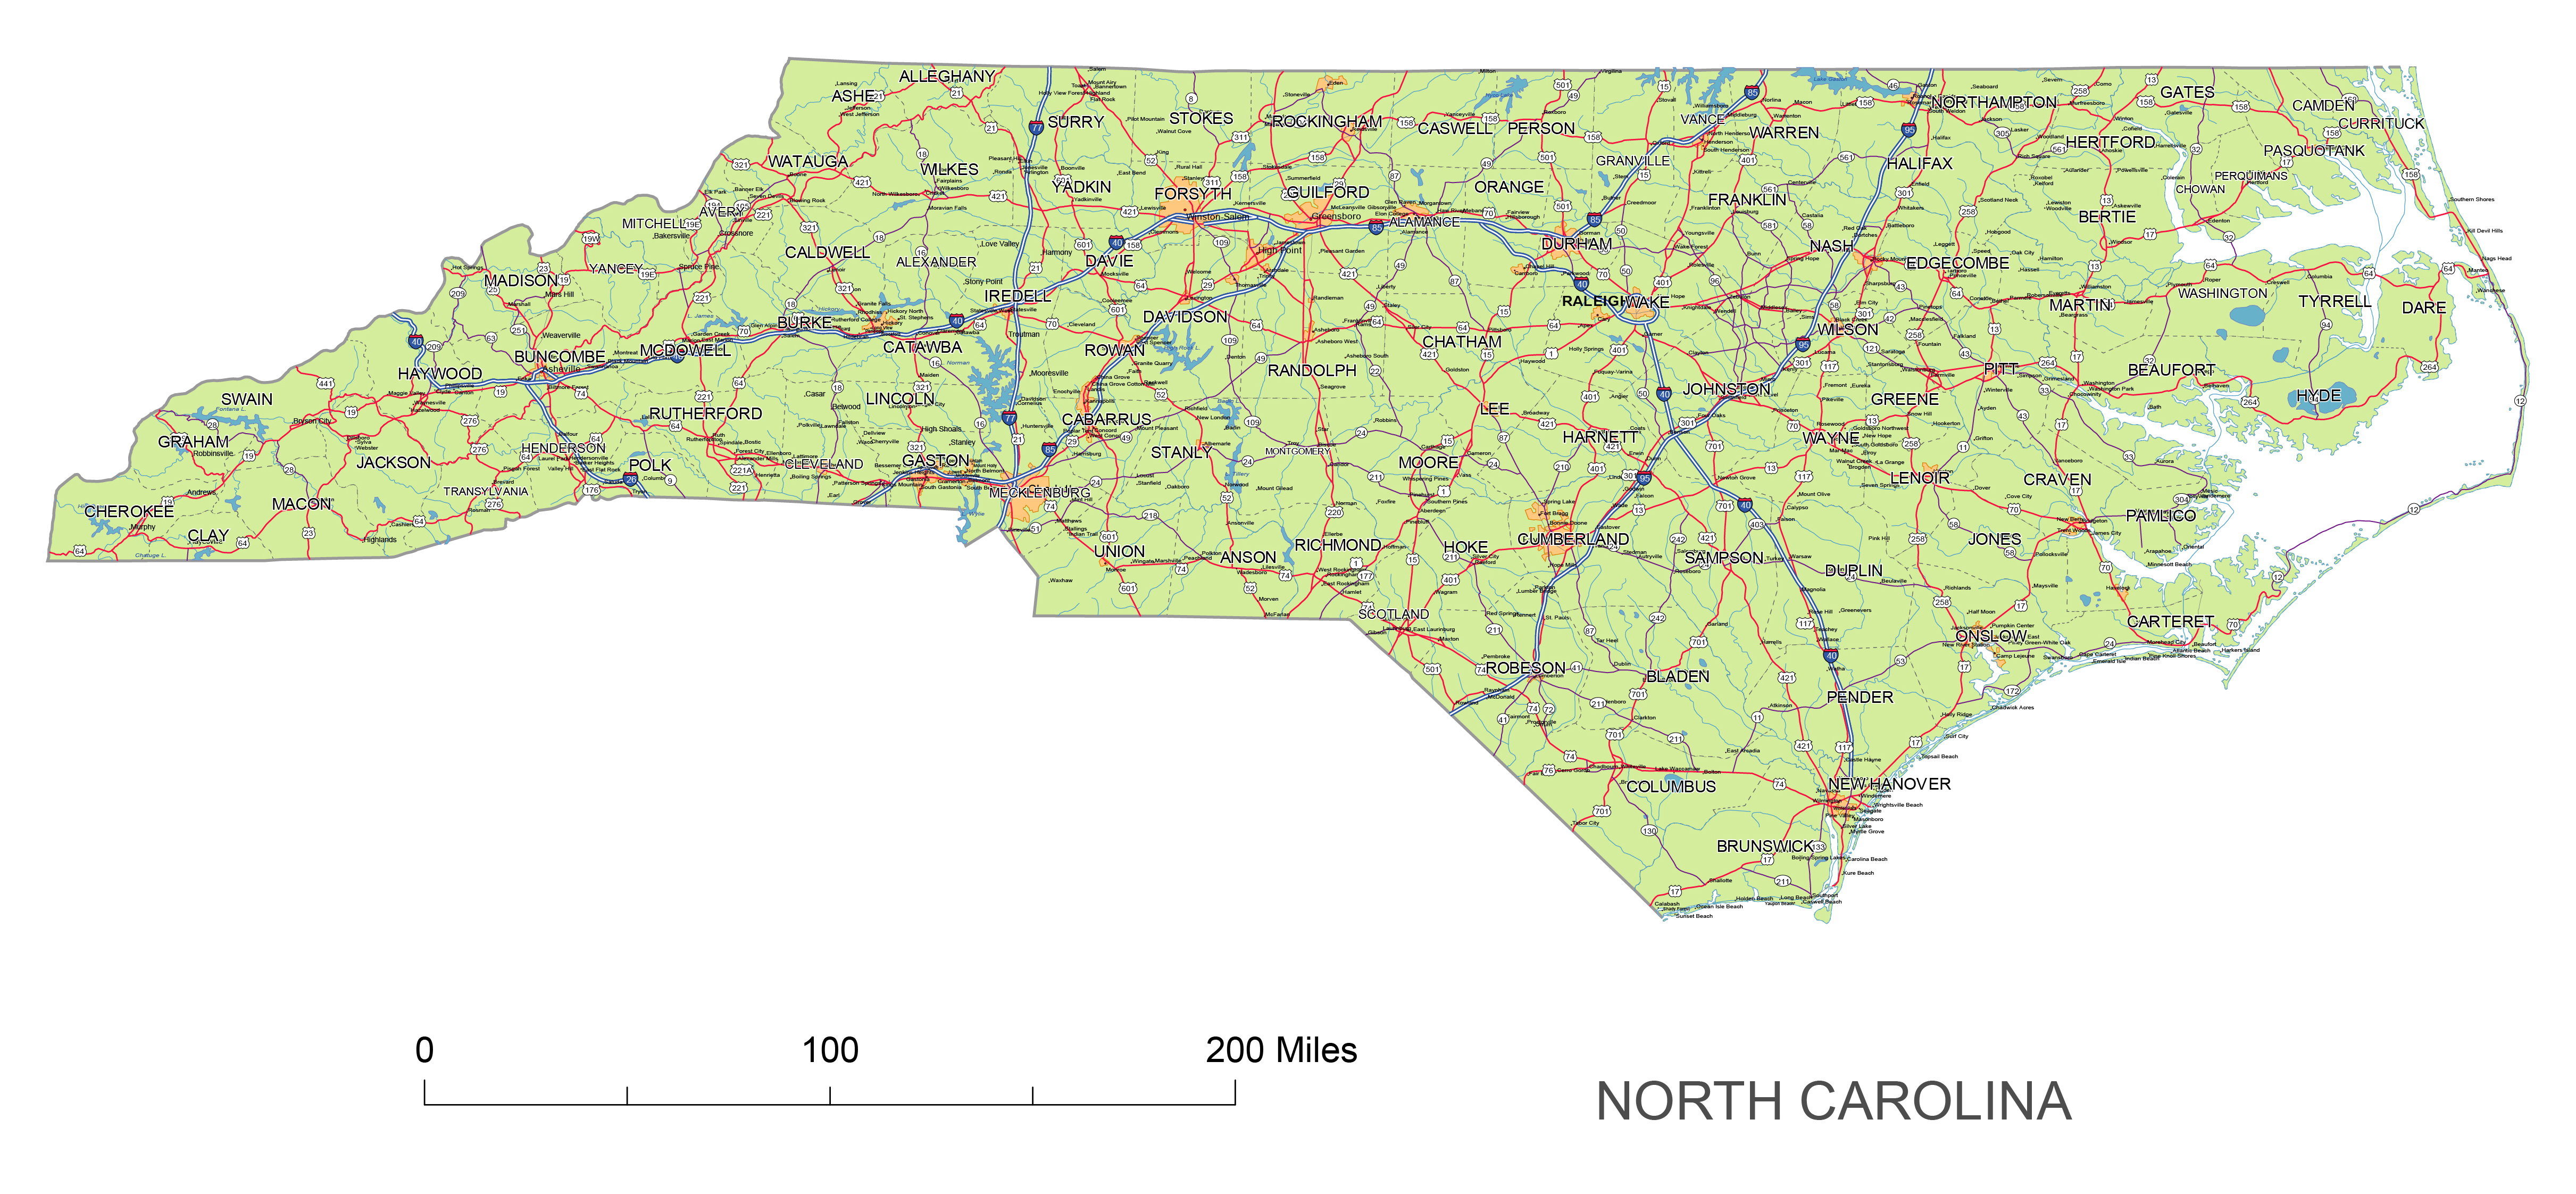 North Carolina State vector road map.A map of NC includes interstates